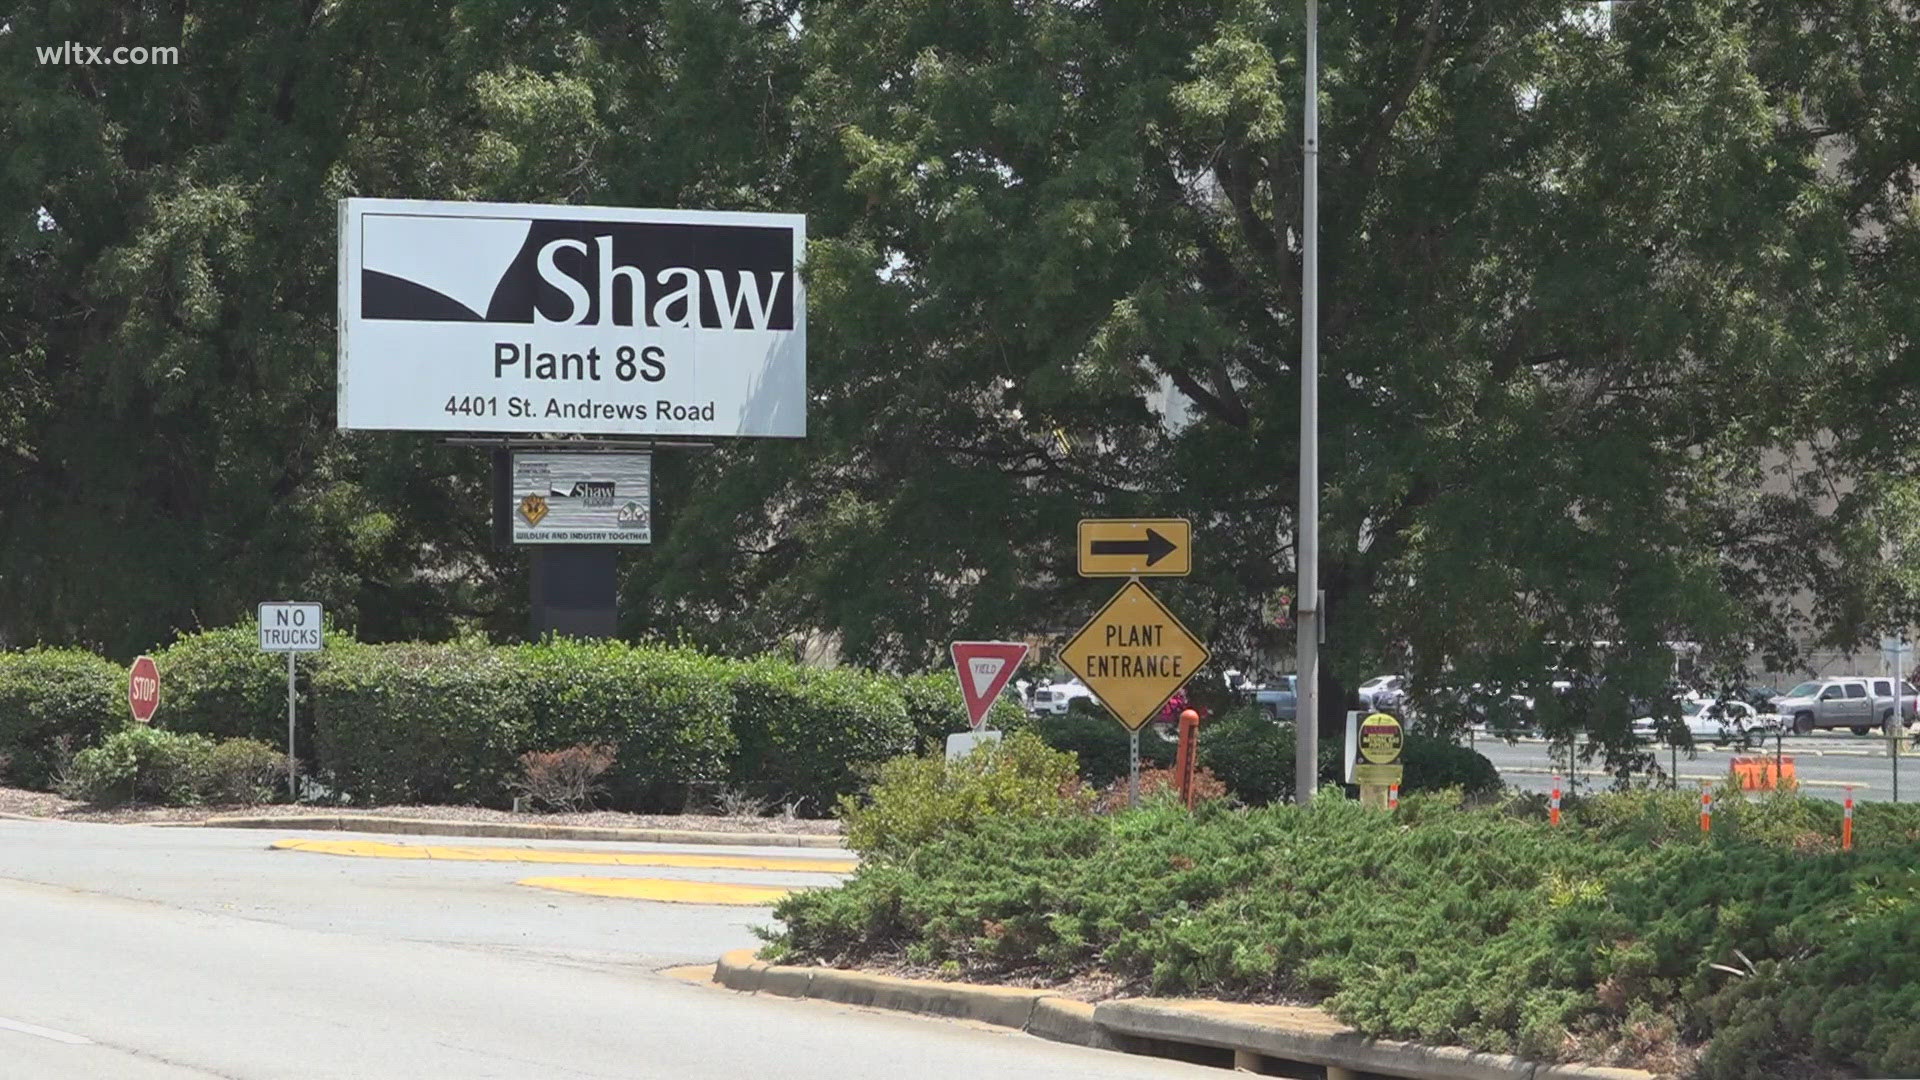 One of the Columbia area's manufacturing facilities has announced it will lay off approximately two-thirds of its workforce in the next 60 days.